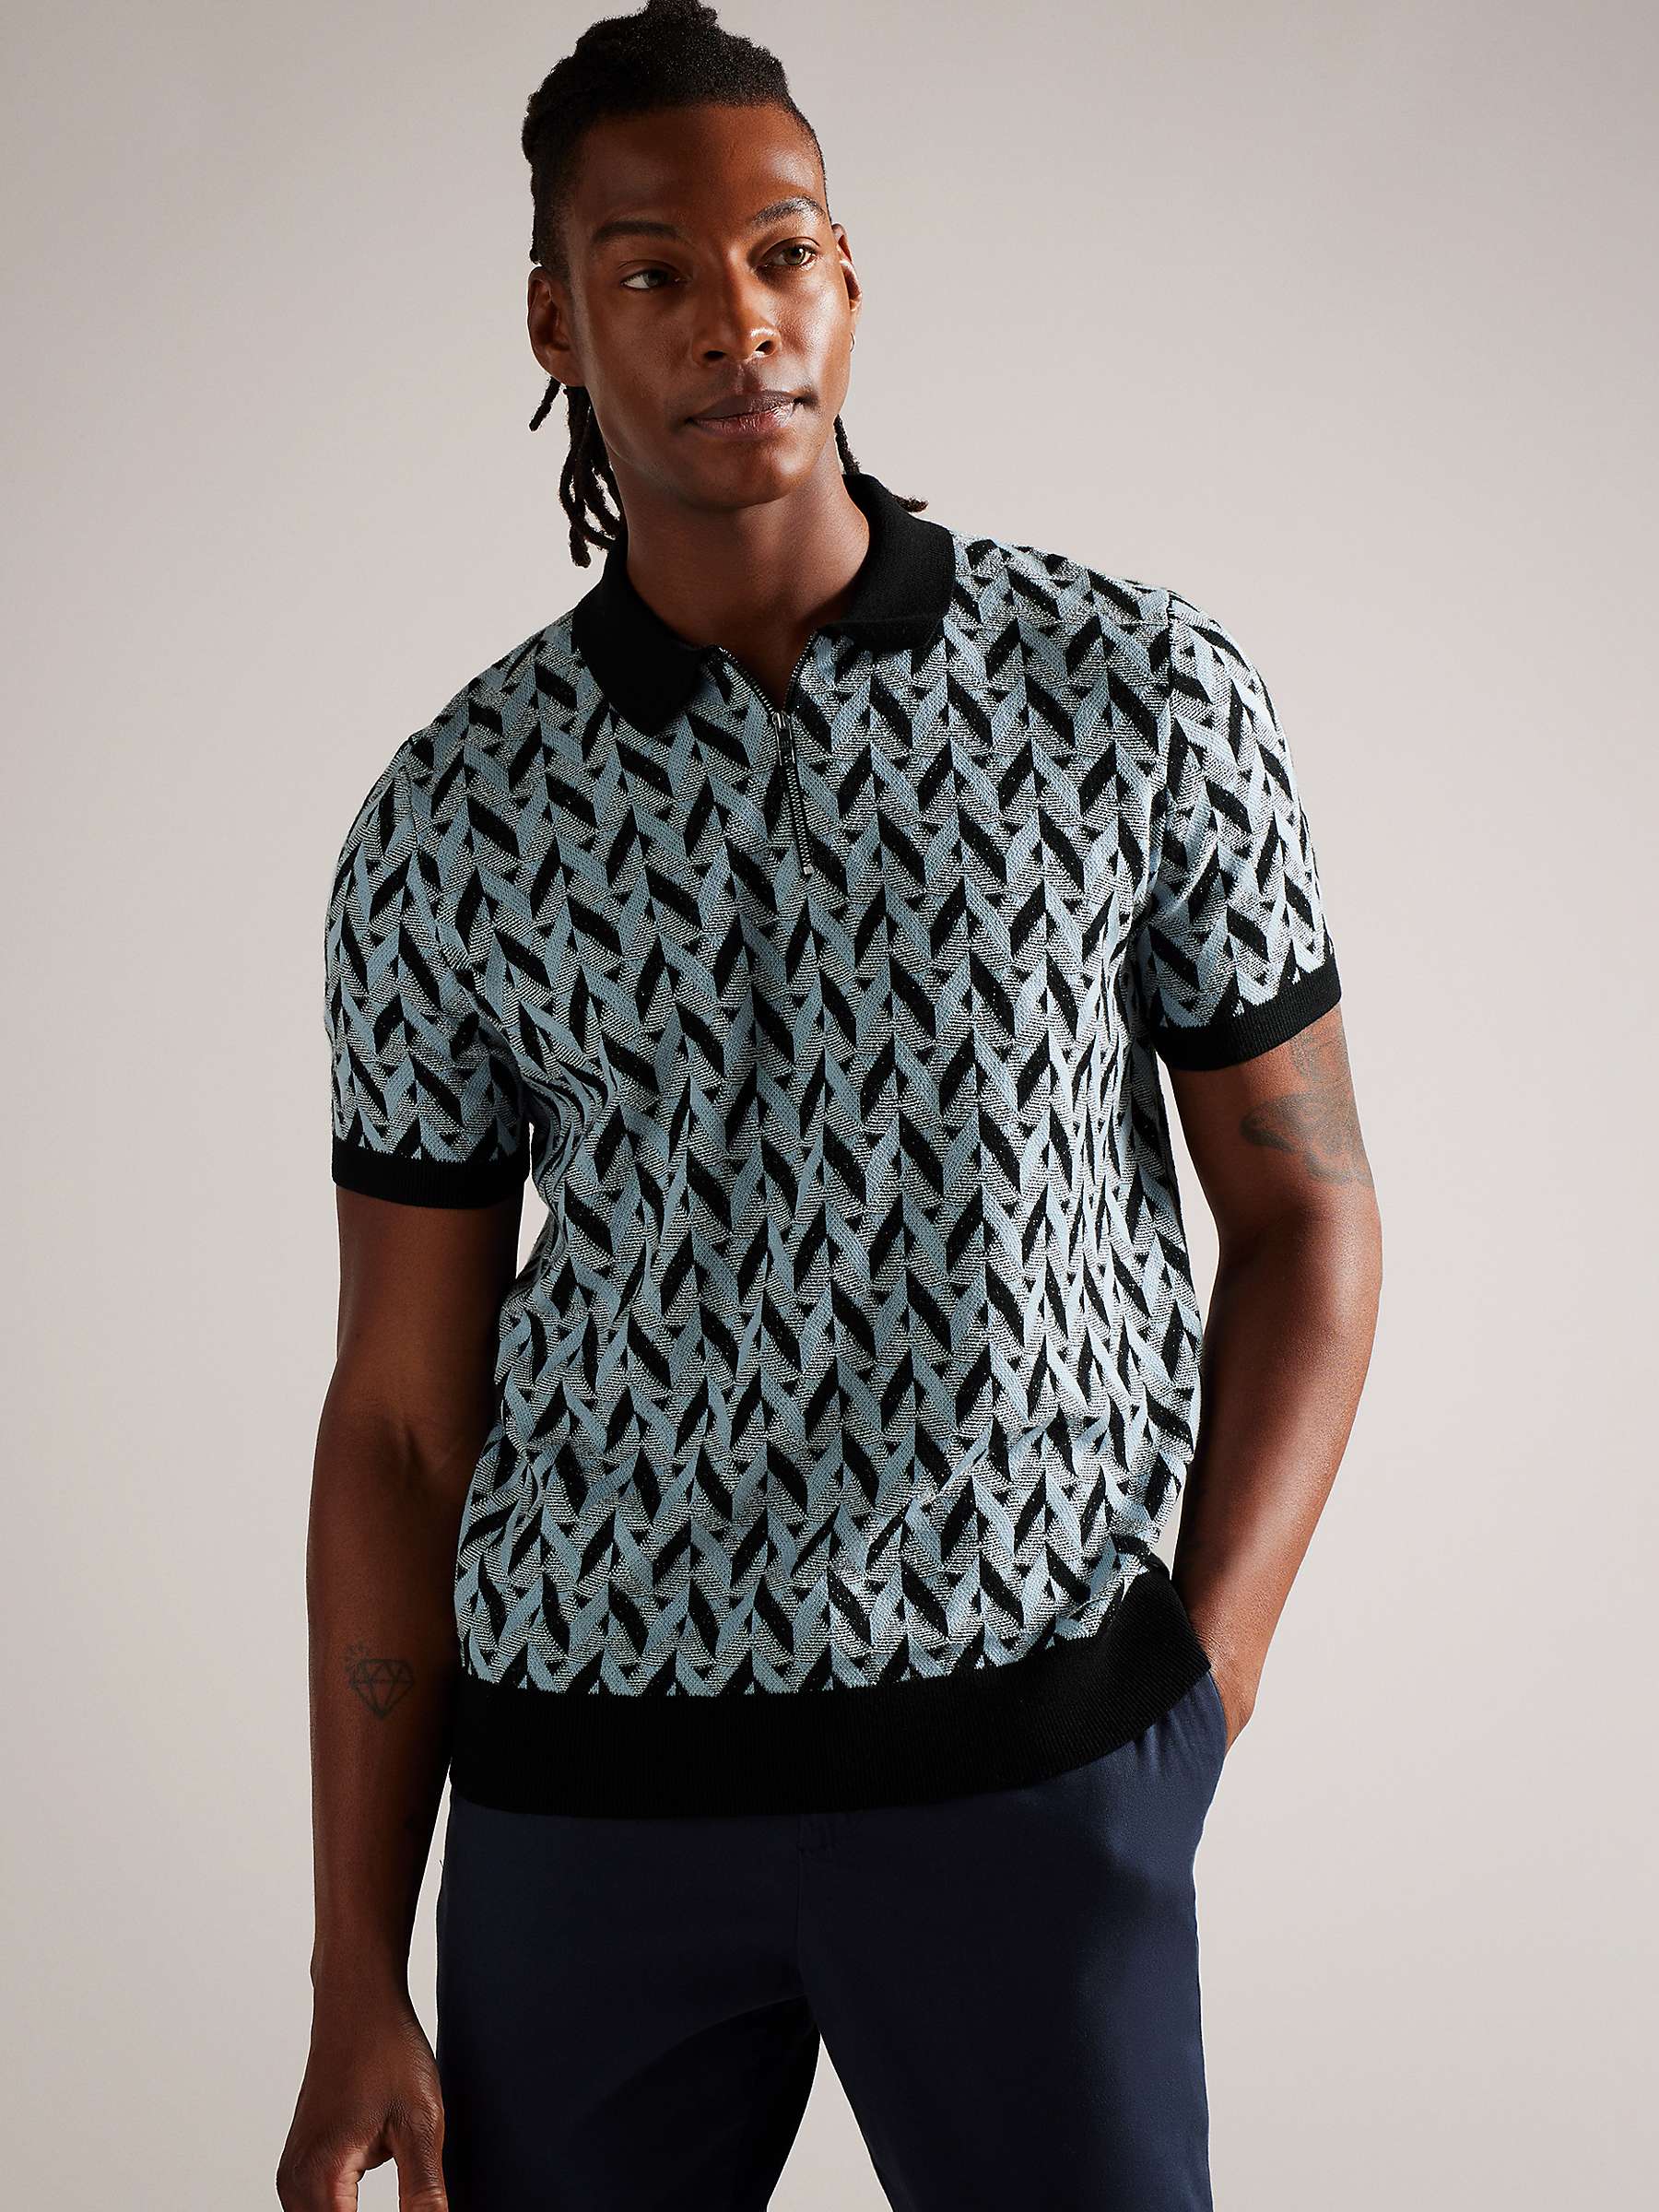 Buy Ted Baker Mitford Wool Blend Boucle Jacquard Zip Polo Shirt Online at johnlewis.com